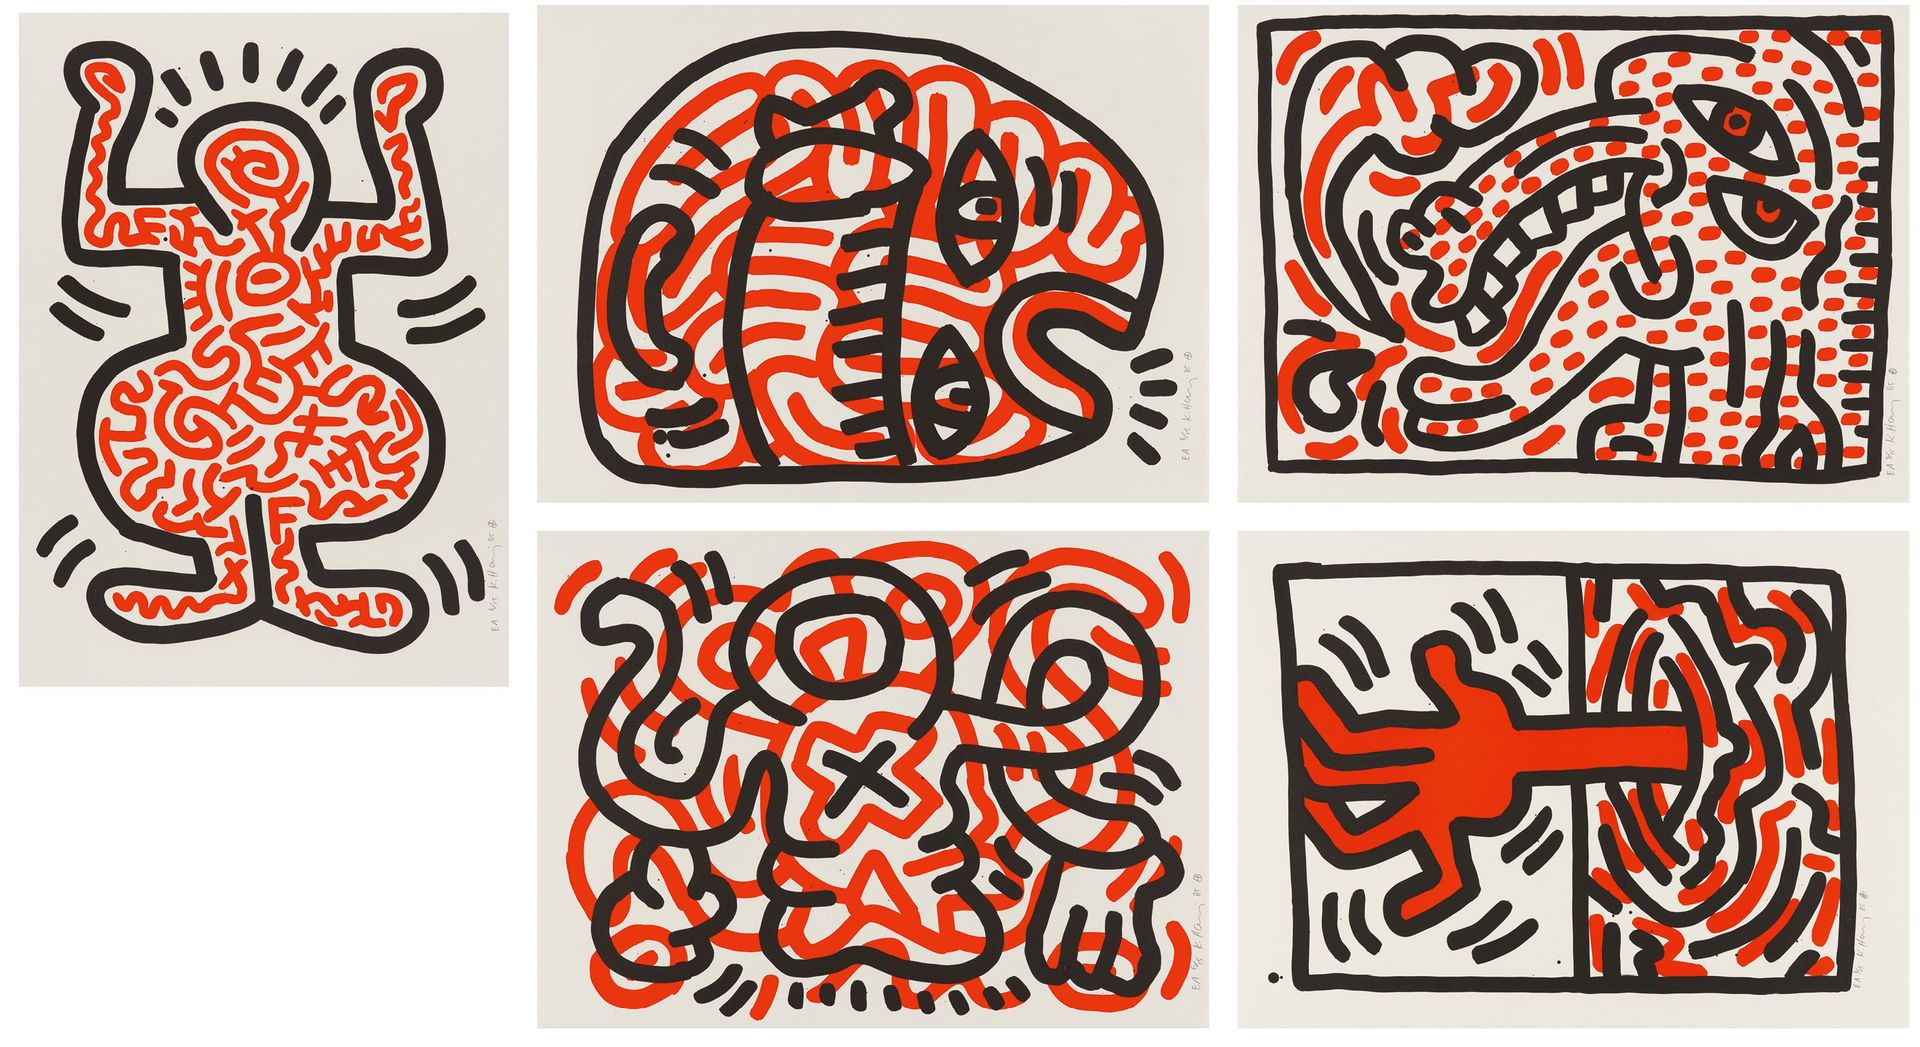 Keith Haring Keith Haring

Ludo
1985

5 lithographies en couleur sur carton, cha&hellip;